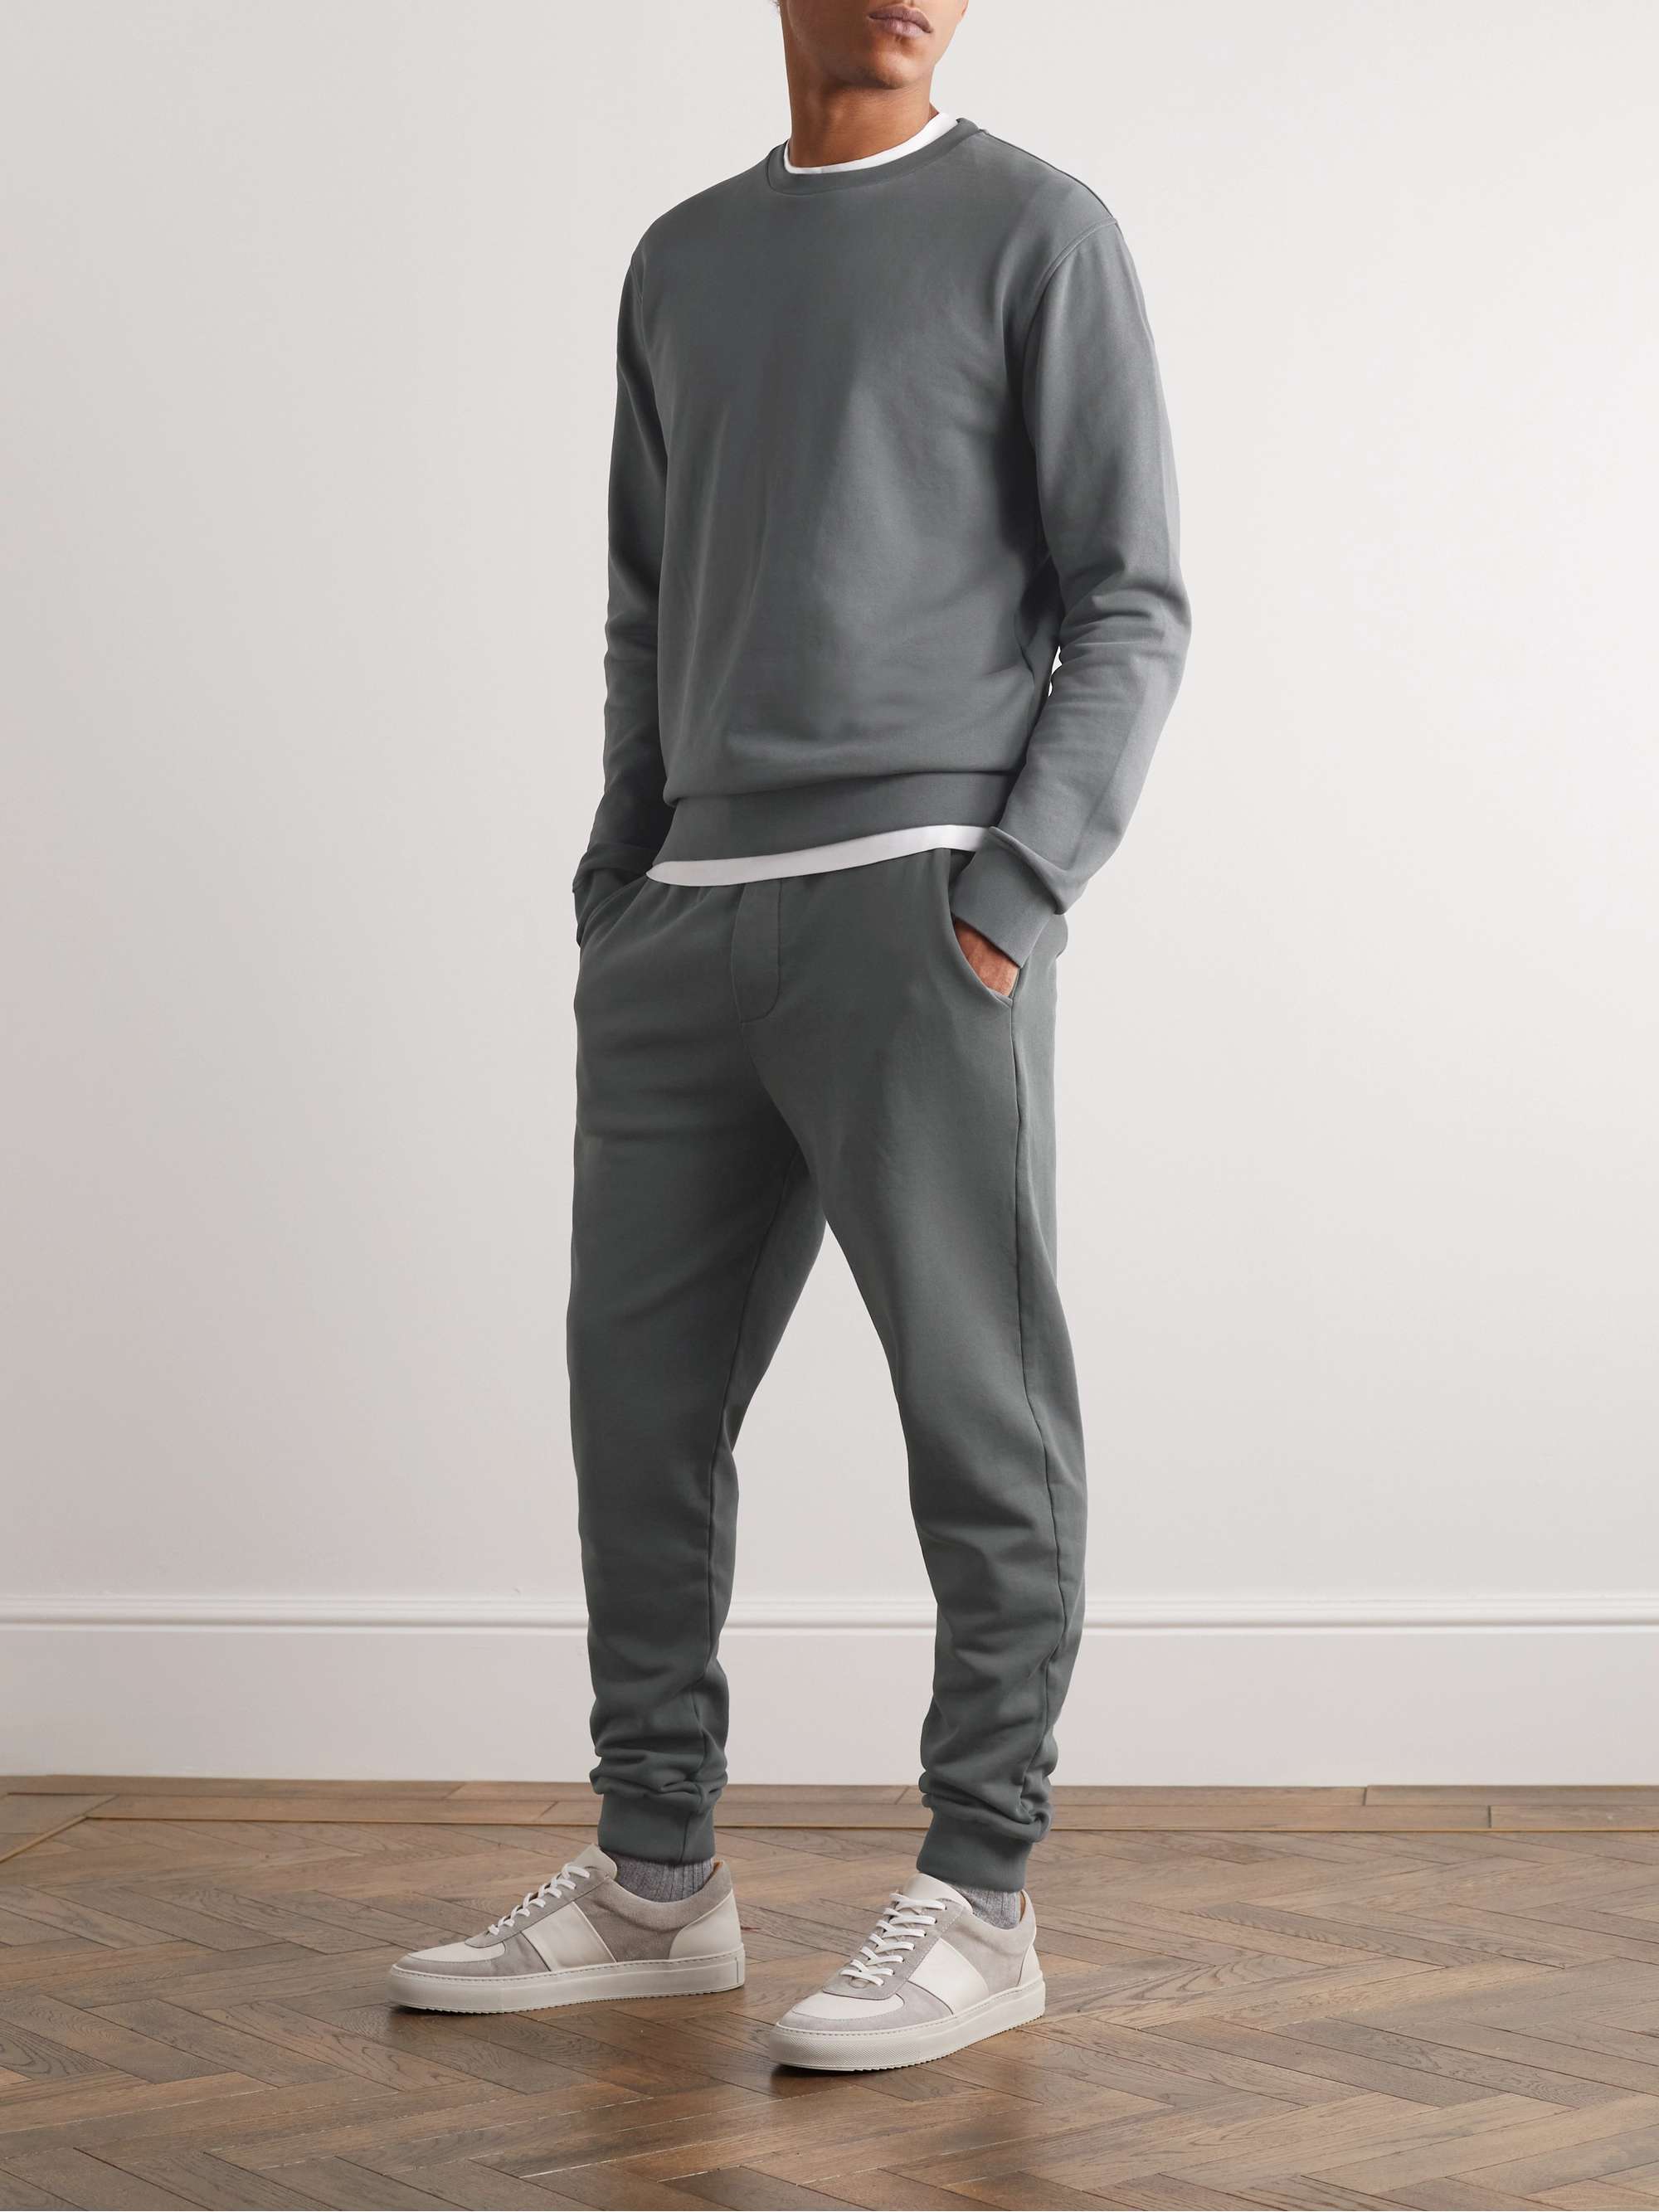 MR P. Tapered Cotton-Jersey Sweatpants for Men